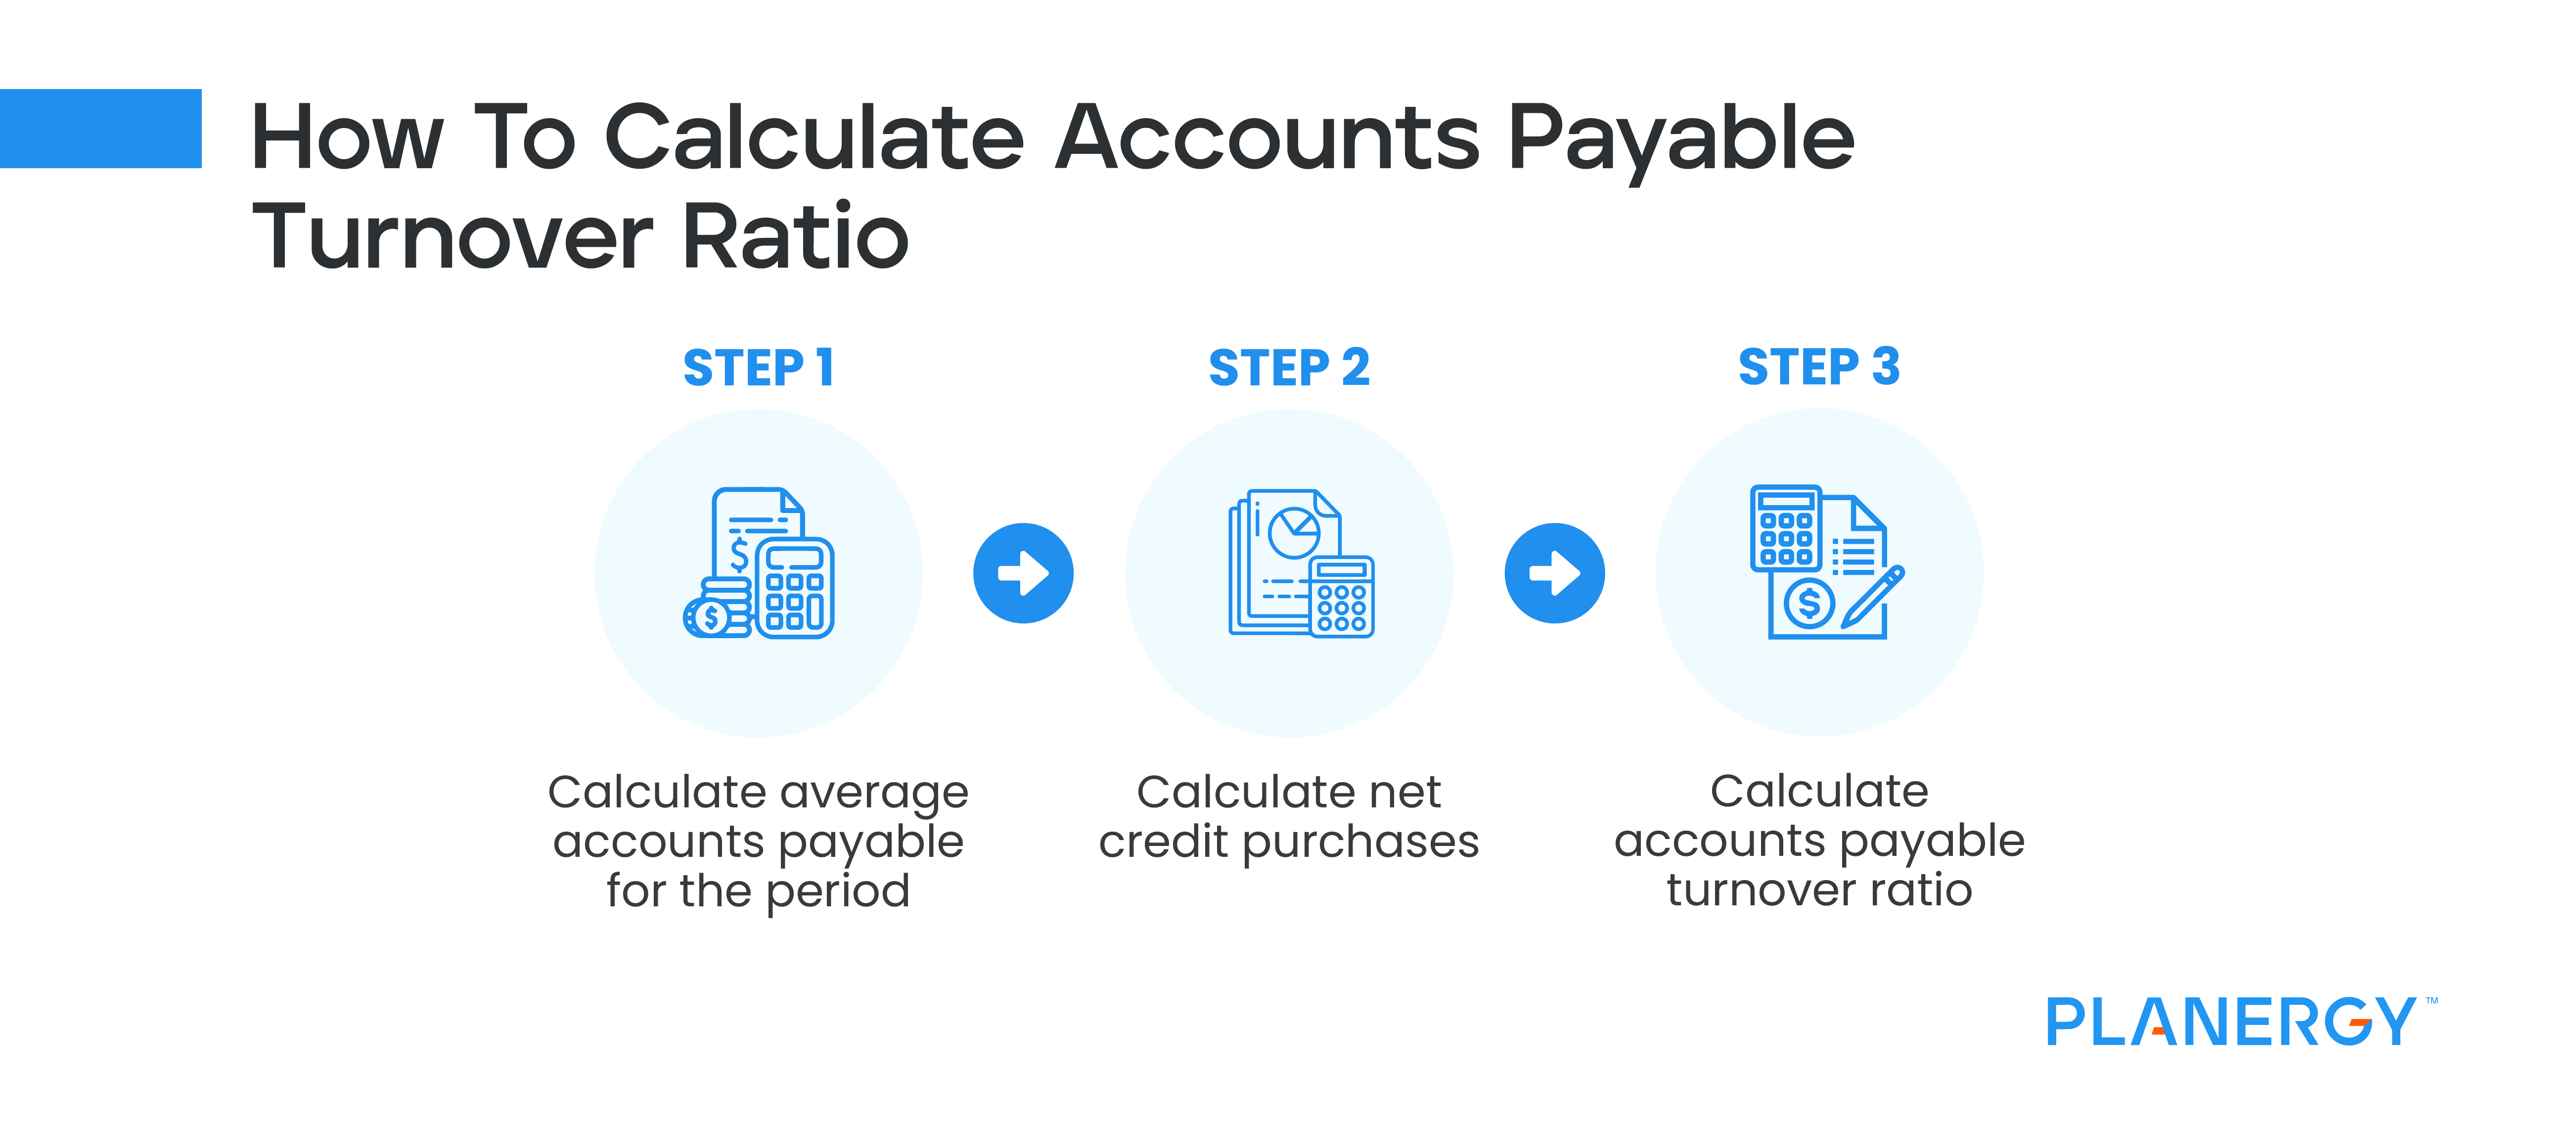 How to Calculate Accounts Payable Turnover Ratio